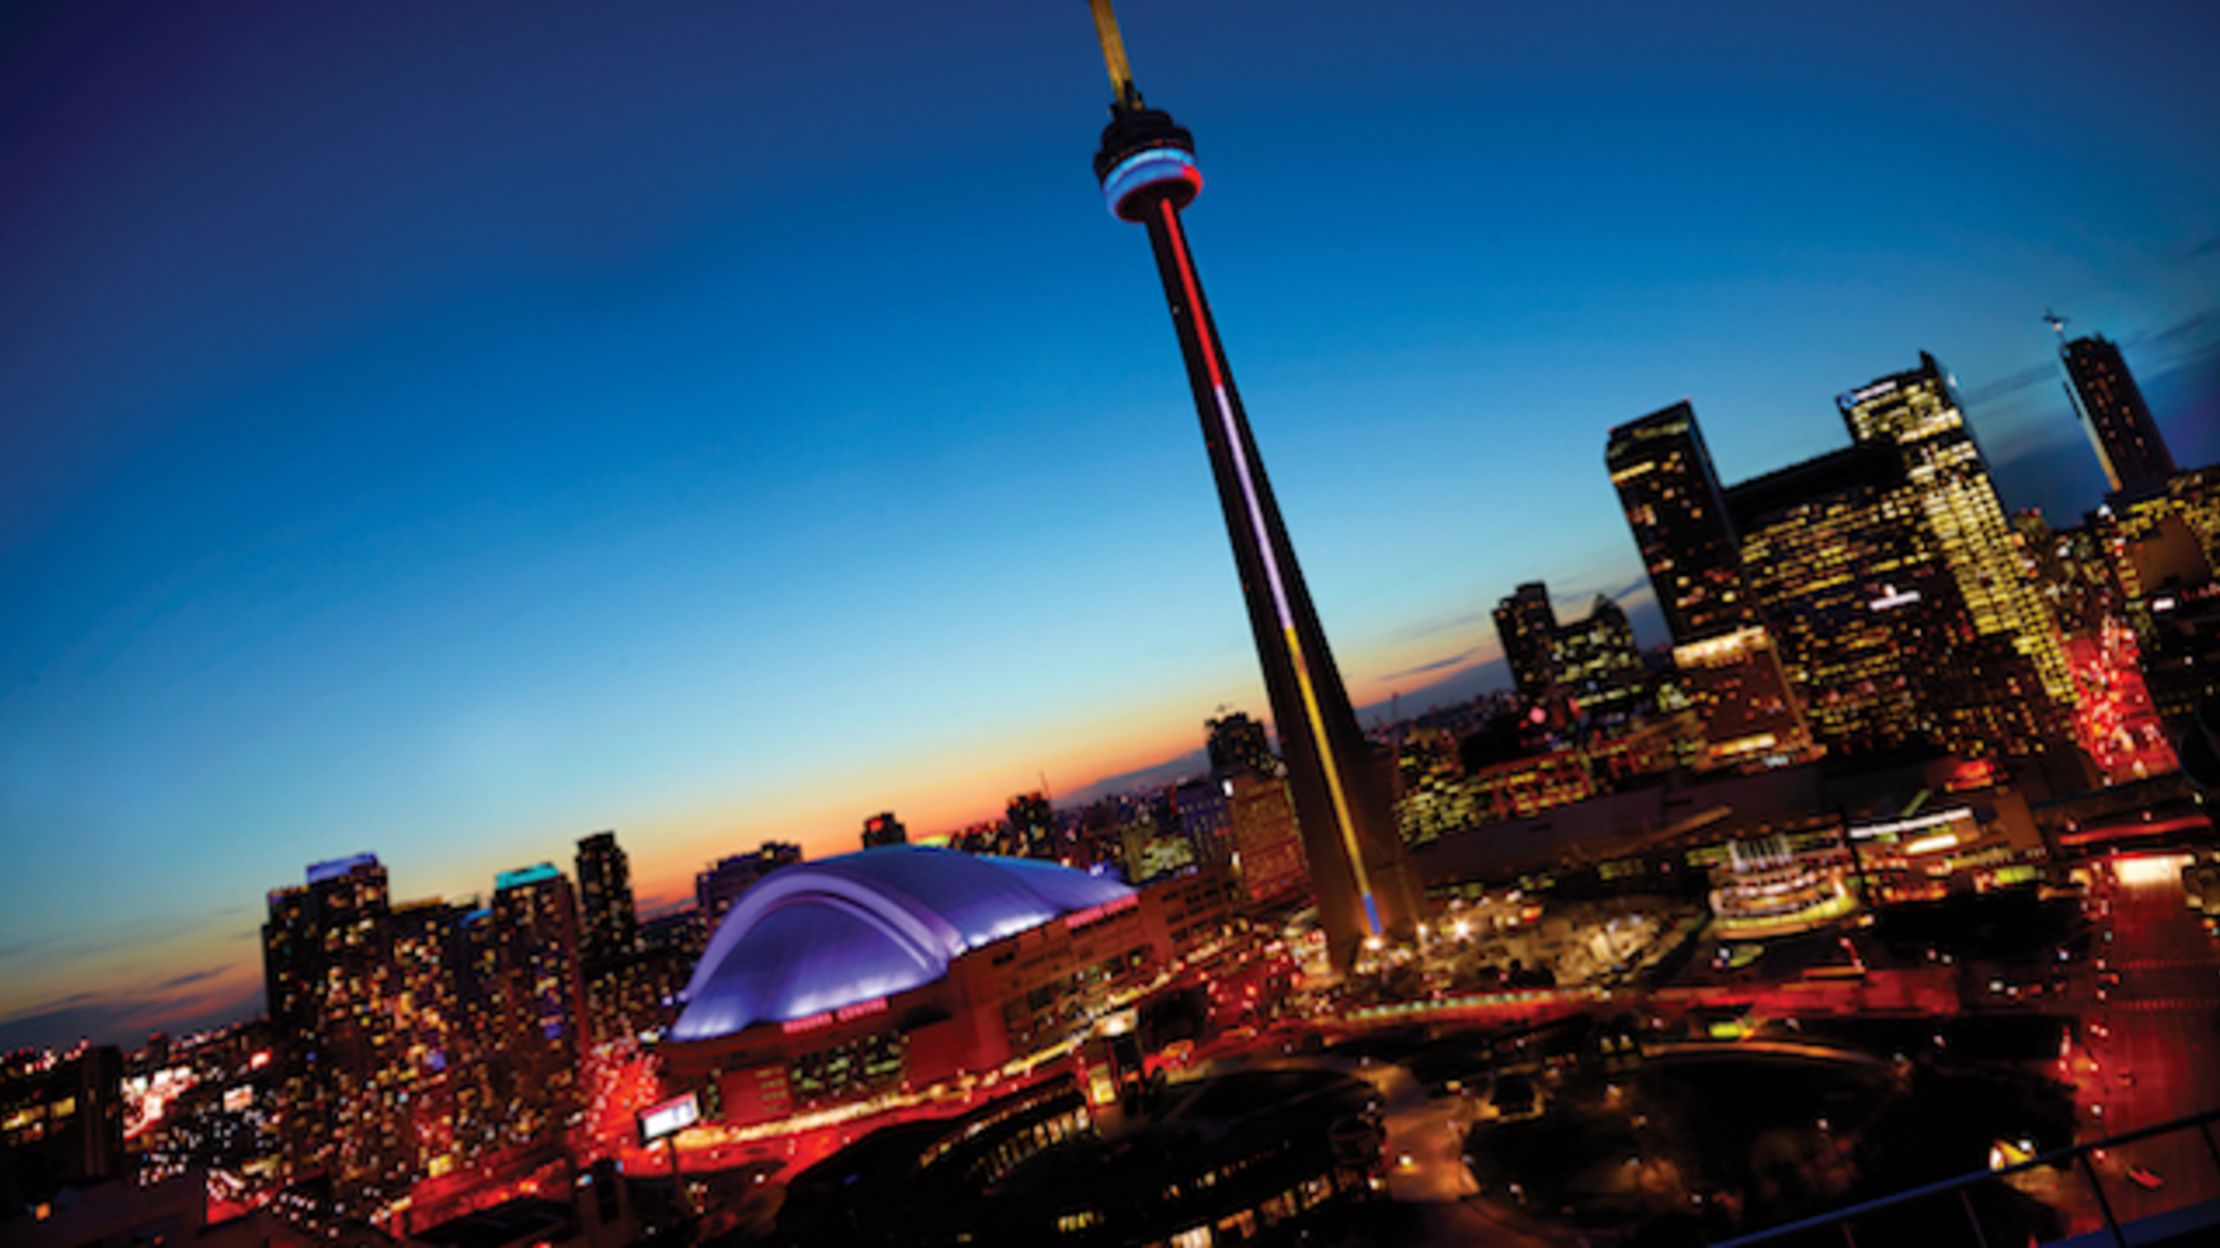 10 Big Facts About Toronto's CN Tower | Mental Floss